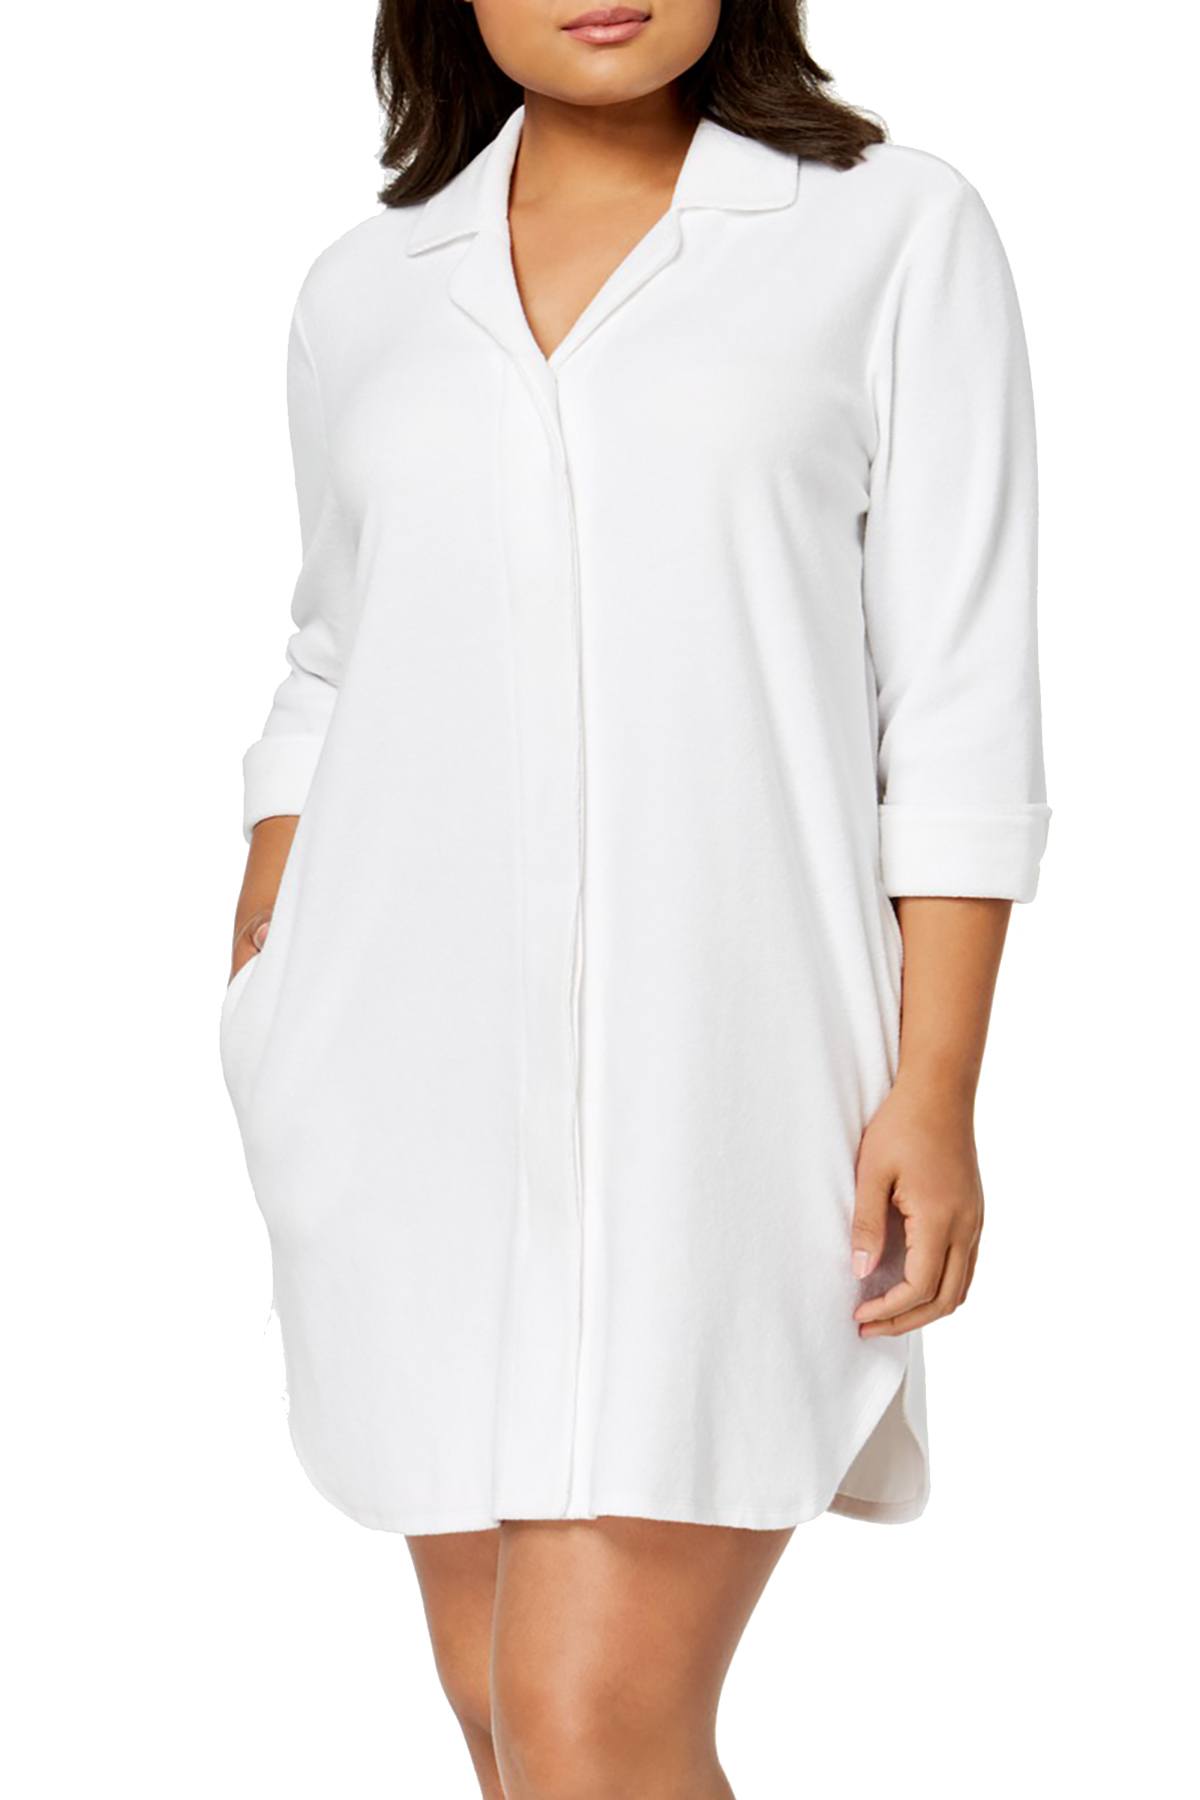 Charter Club Intimates PLUS Bright White Notch-Collar Snap-Front Robe ...